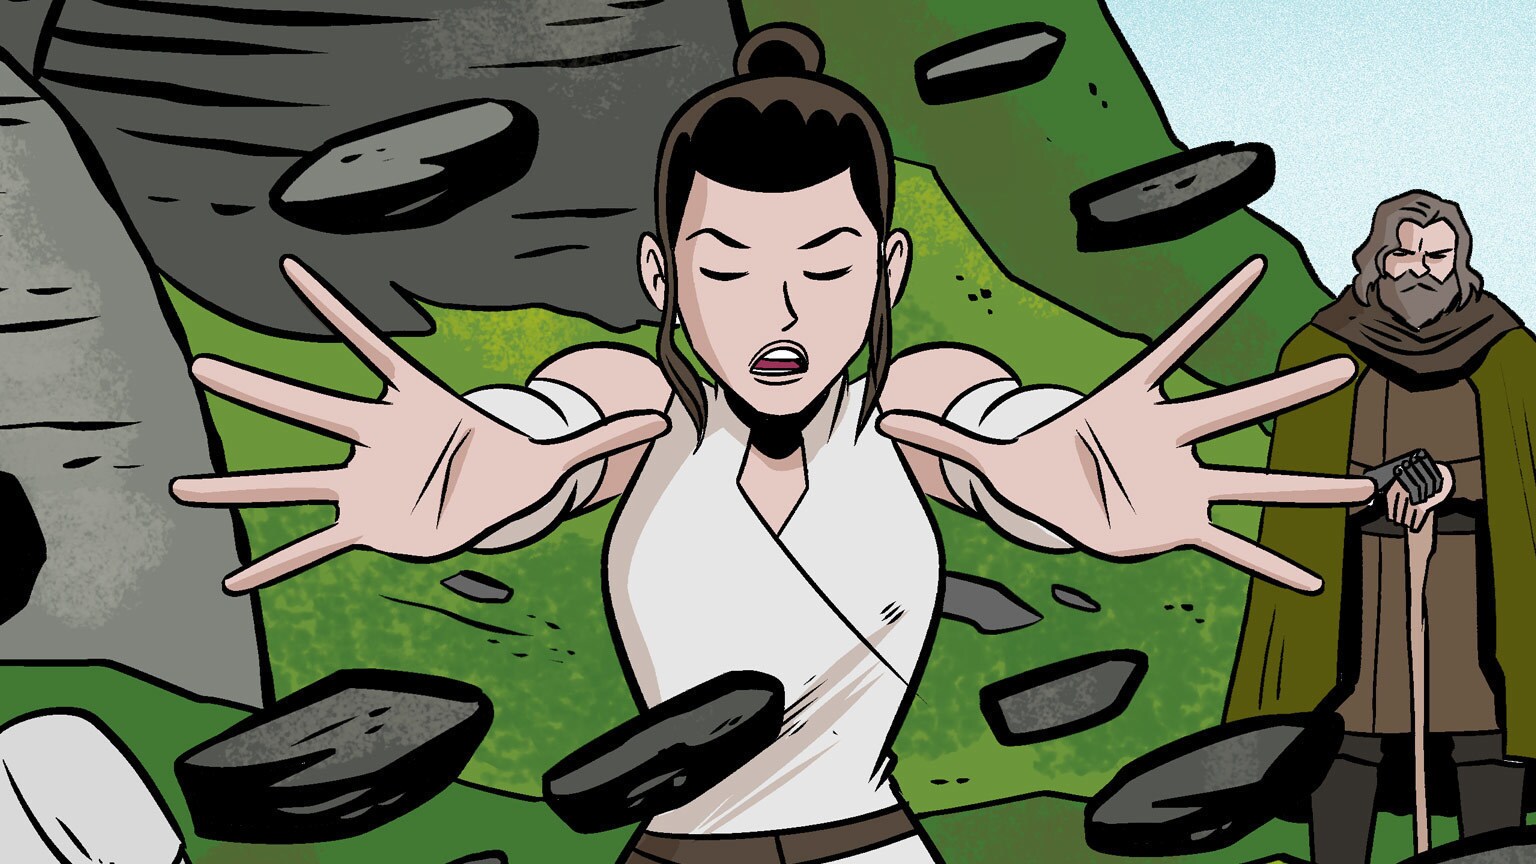 An Impatient Rey Trains with Luke in IDW’s Star Wars Adventures #26 - Exclusive Preview